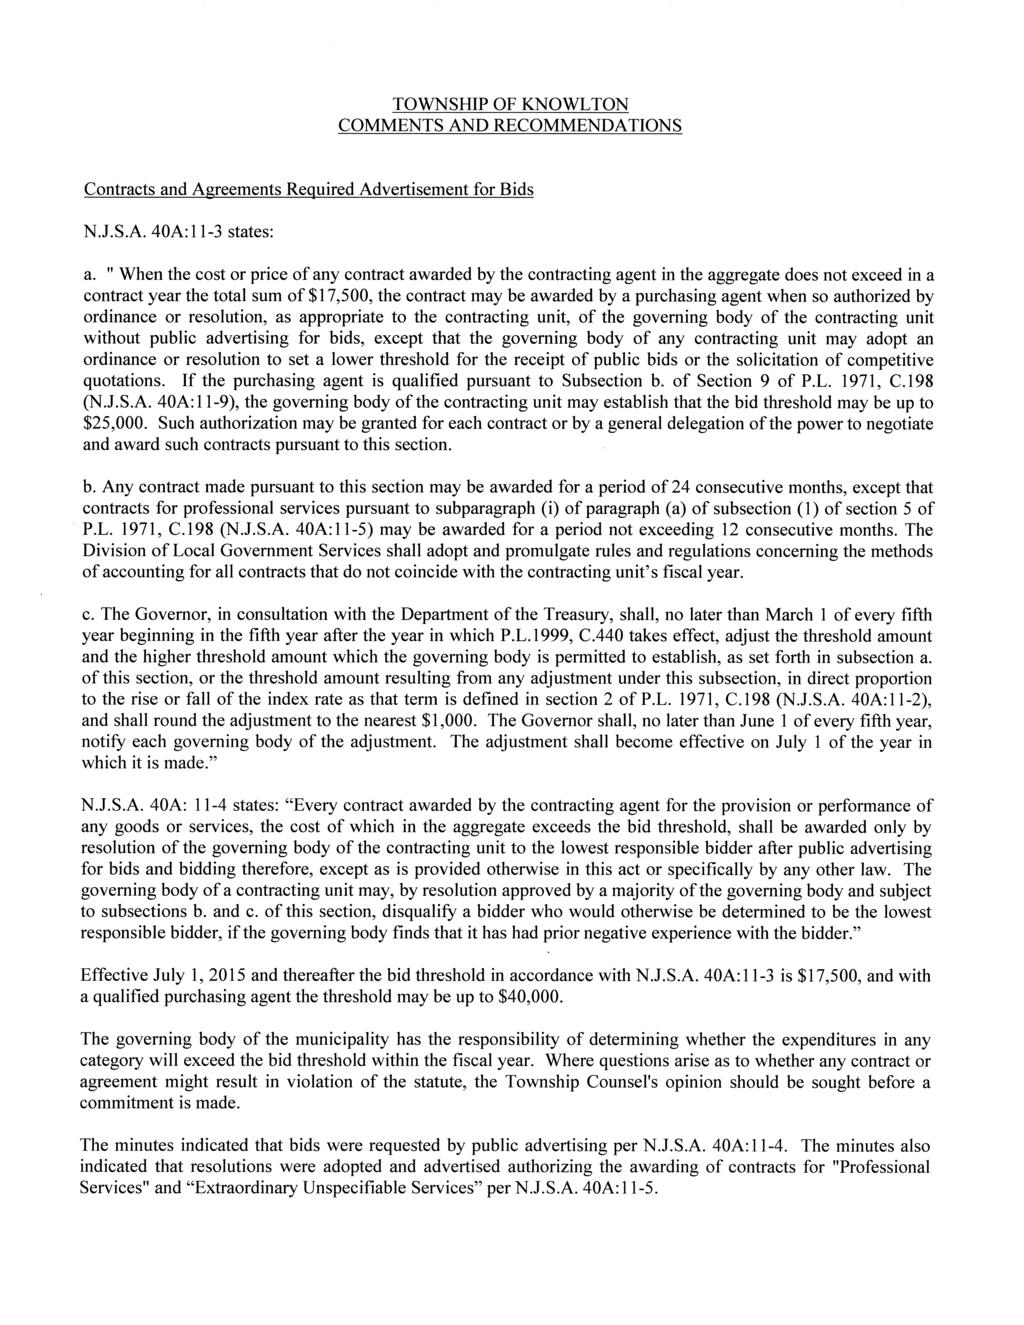 COMMENTS AND RECOMMENDATIONS 1 Contracts and Agreements Required Advertisement for Bids N.J.S.A. 40A:ll-3 states: a.